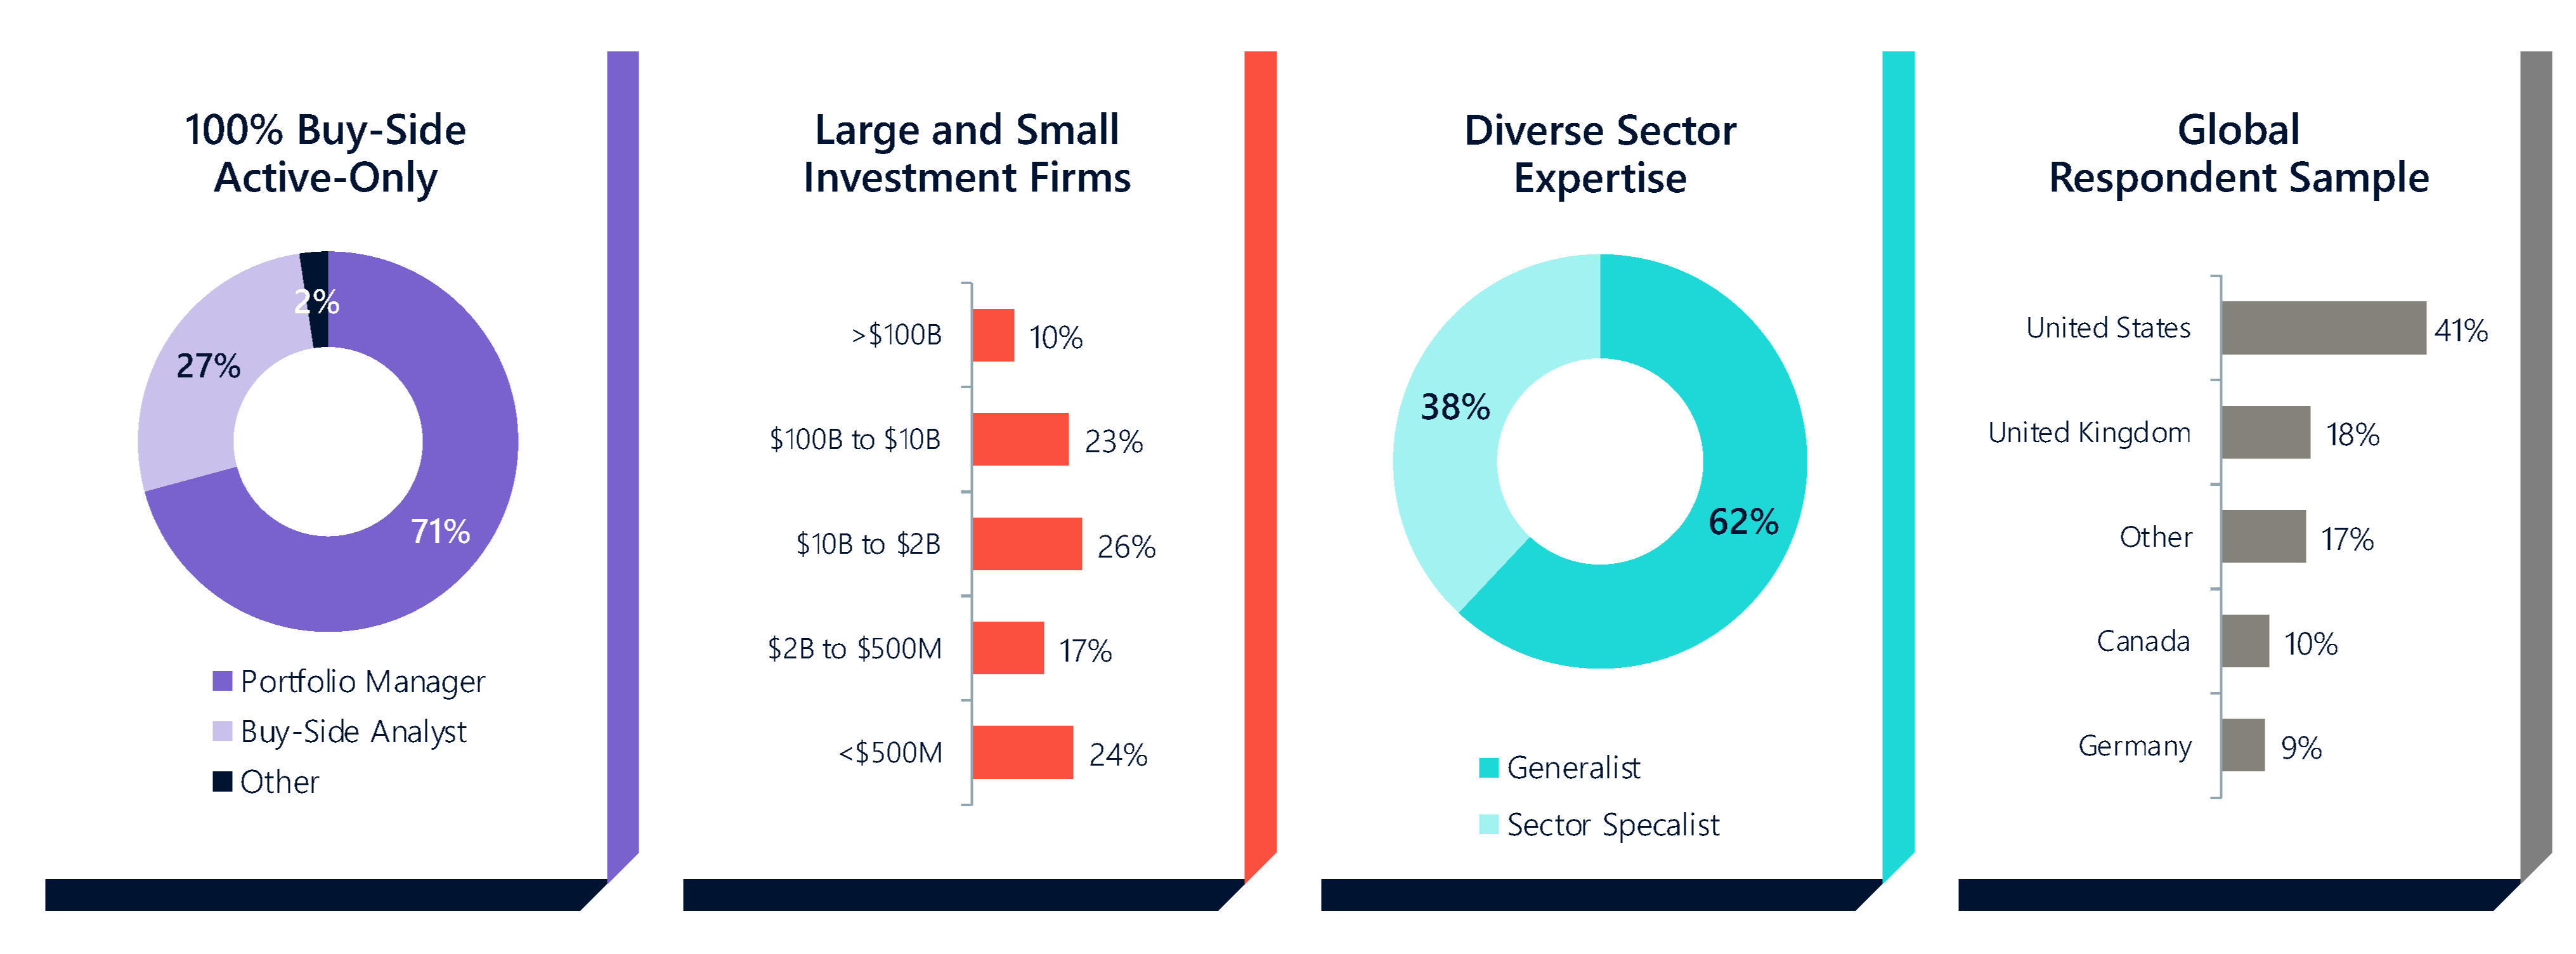 Four graphs – two pie charts and two bar charts – respectively depicting data on buy-side active-only investors, large and small investment firms, diverse sector experts, and global respondents.